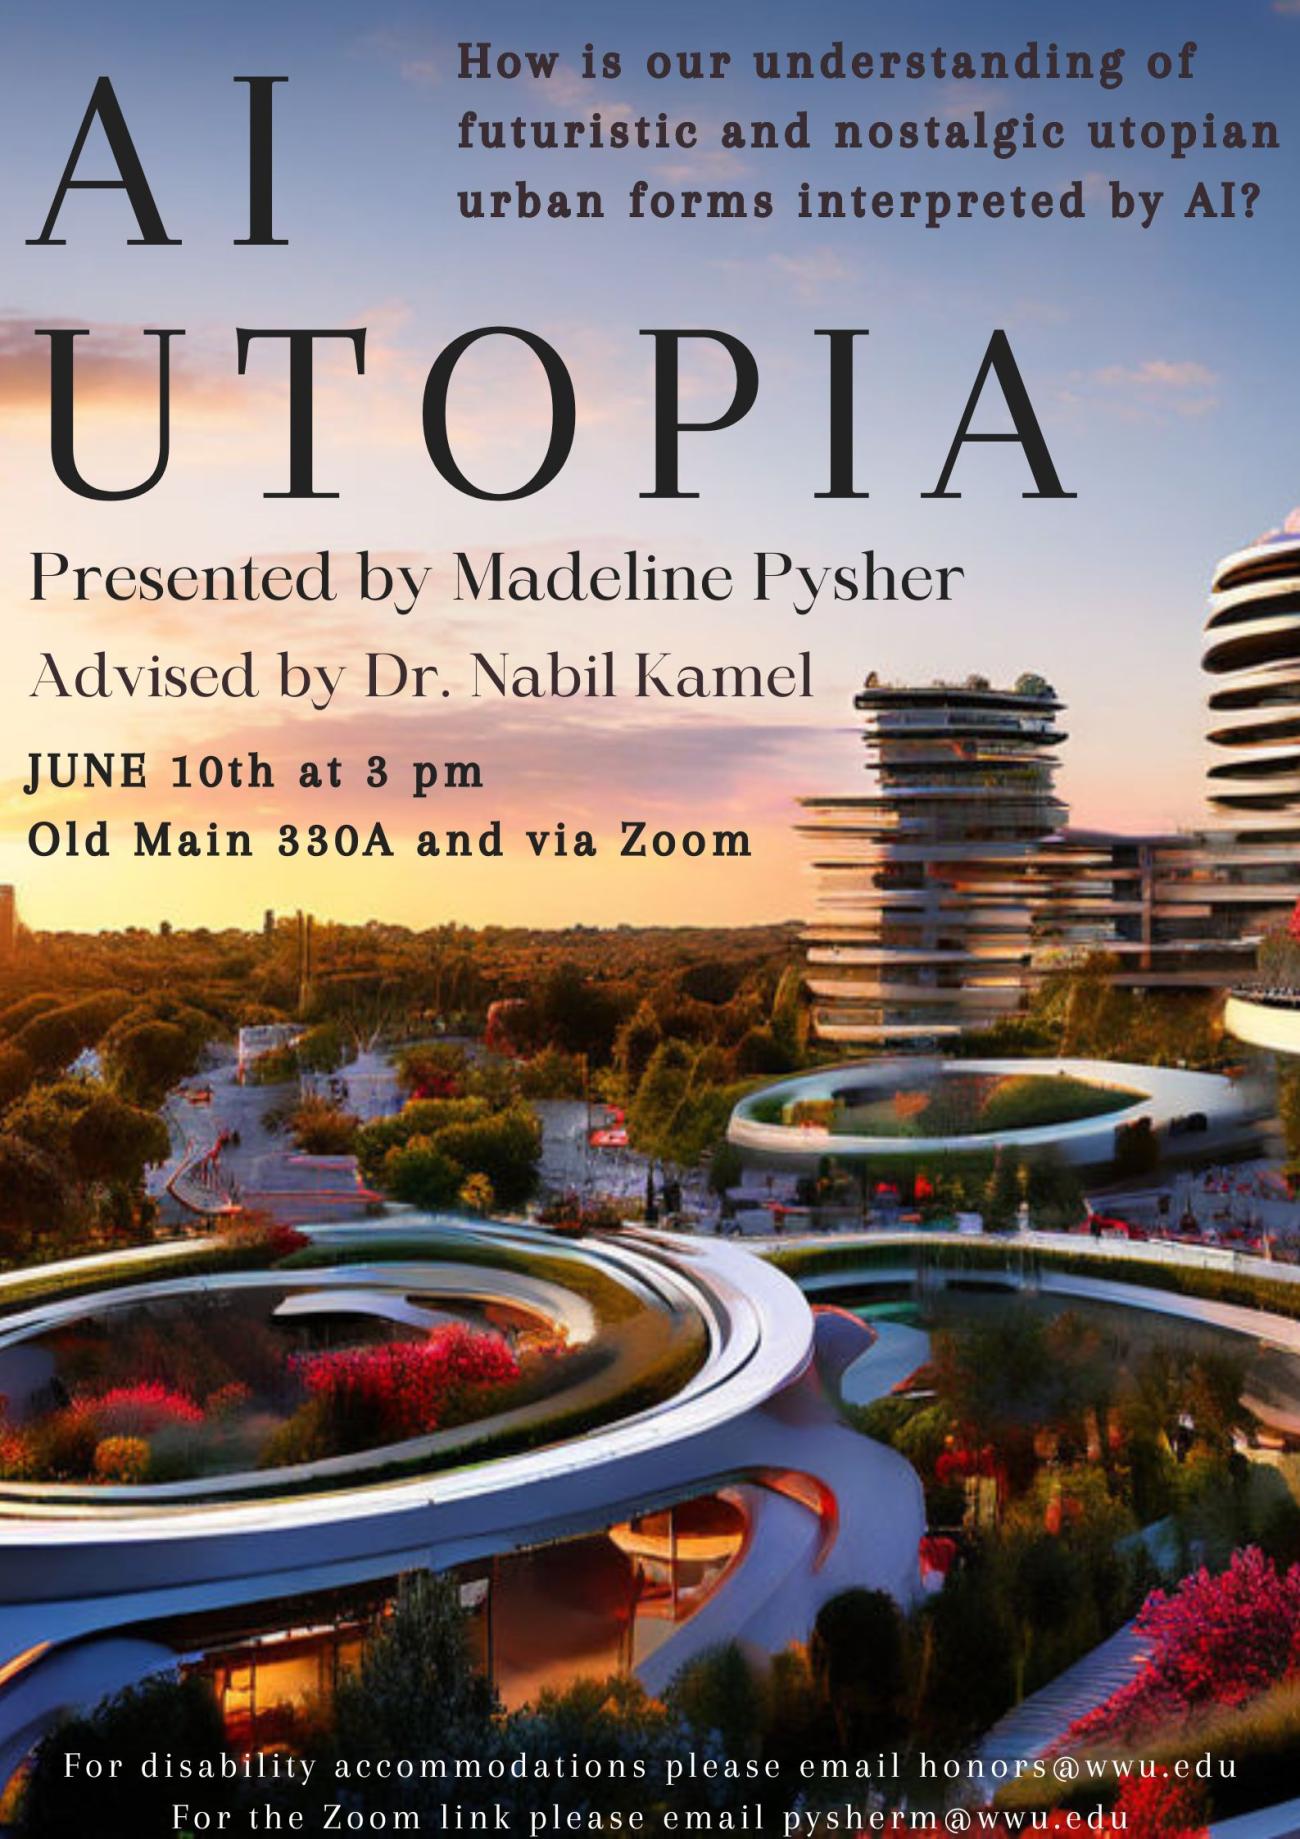 Title: AI Utopia. Description: How is our understanding of futuristic and nostalgic utopian urban forms interpreted by AI? Presented by Madeline Pysher and advised by Dr. Nabil Kamel. June 10th at 3 pm in Old Main 330A and via Zoom. For disability accommodations please email honors@wwu.edu. For the Zoom link please email pysherm@wwu.edu. Background: an AI-generated futuristic-looking cityscape during the sunset with trees and circular buildings that spiral upwards.